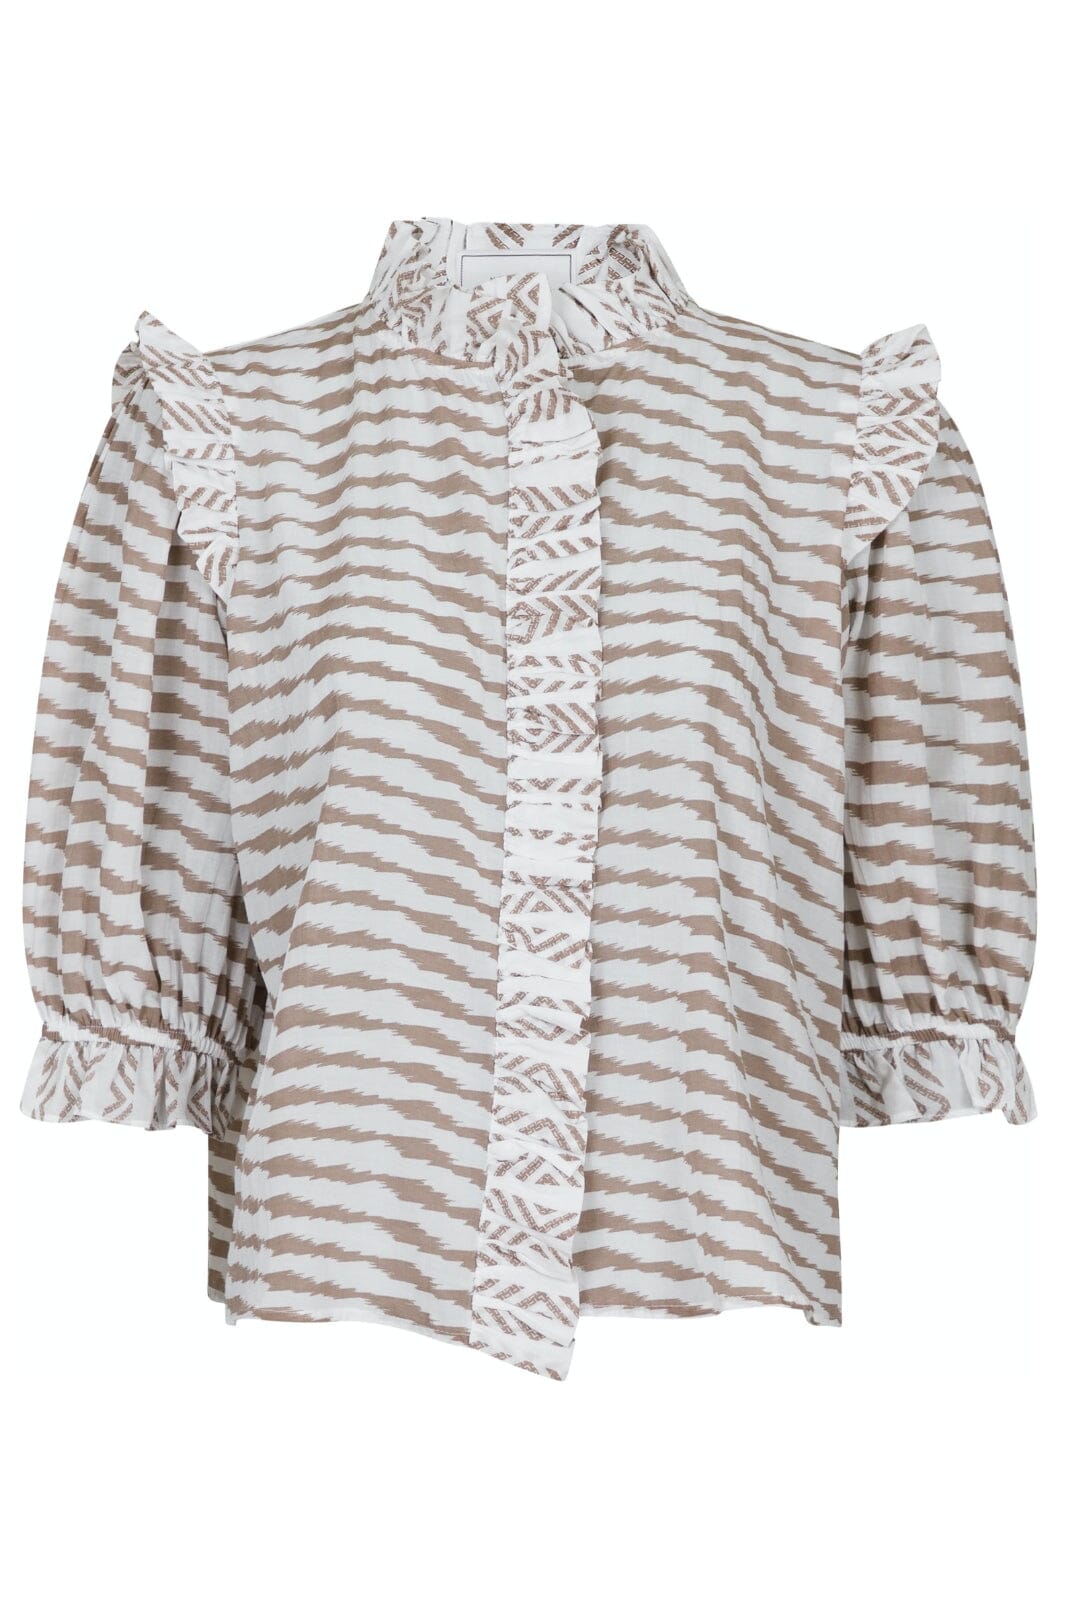 Neo Noir - Chacha Graphic Blouse - Sand Bluser 